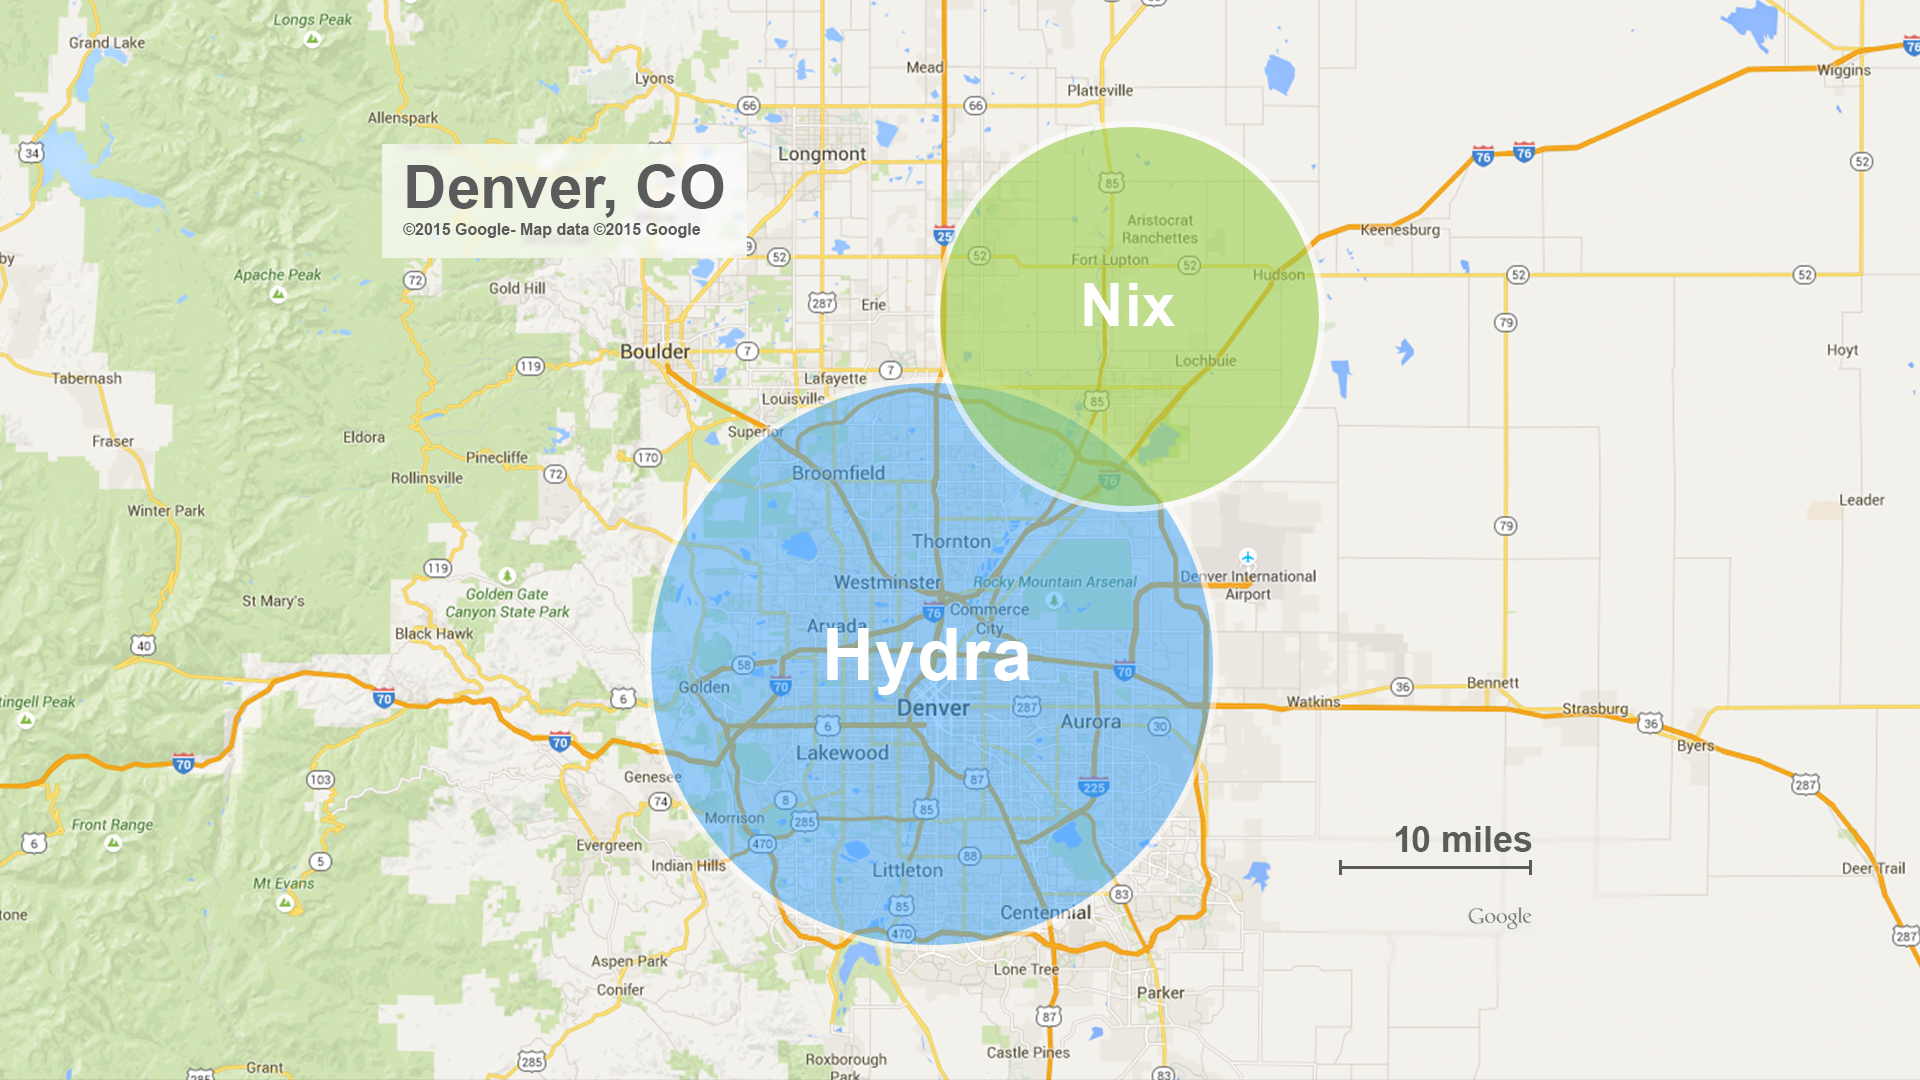 The approximate sizes of Pluto's moons Nix and Hydra compared to Denver, Colorado.